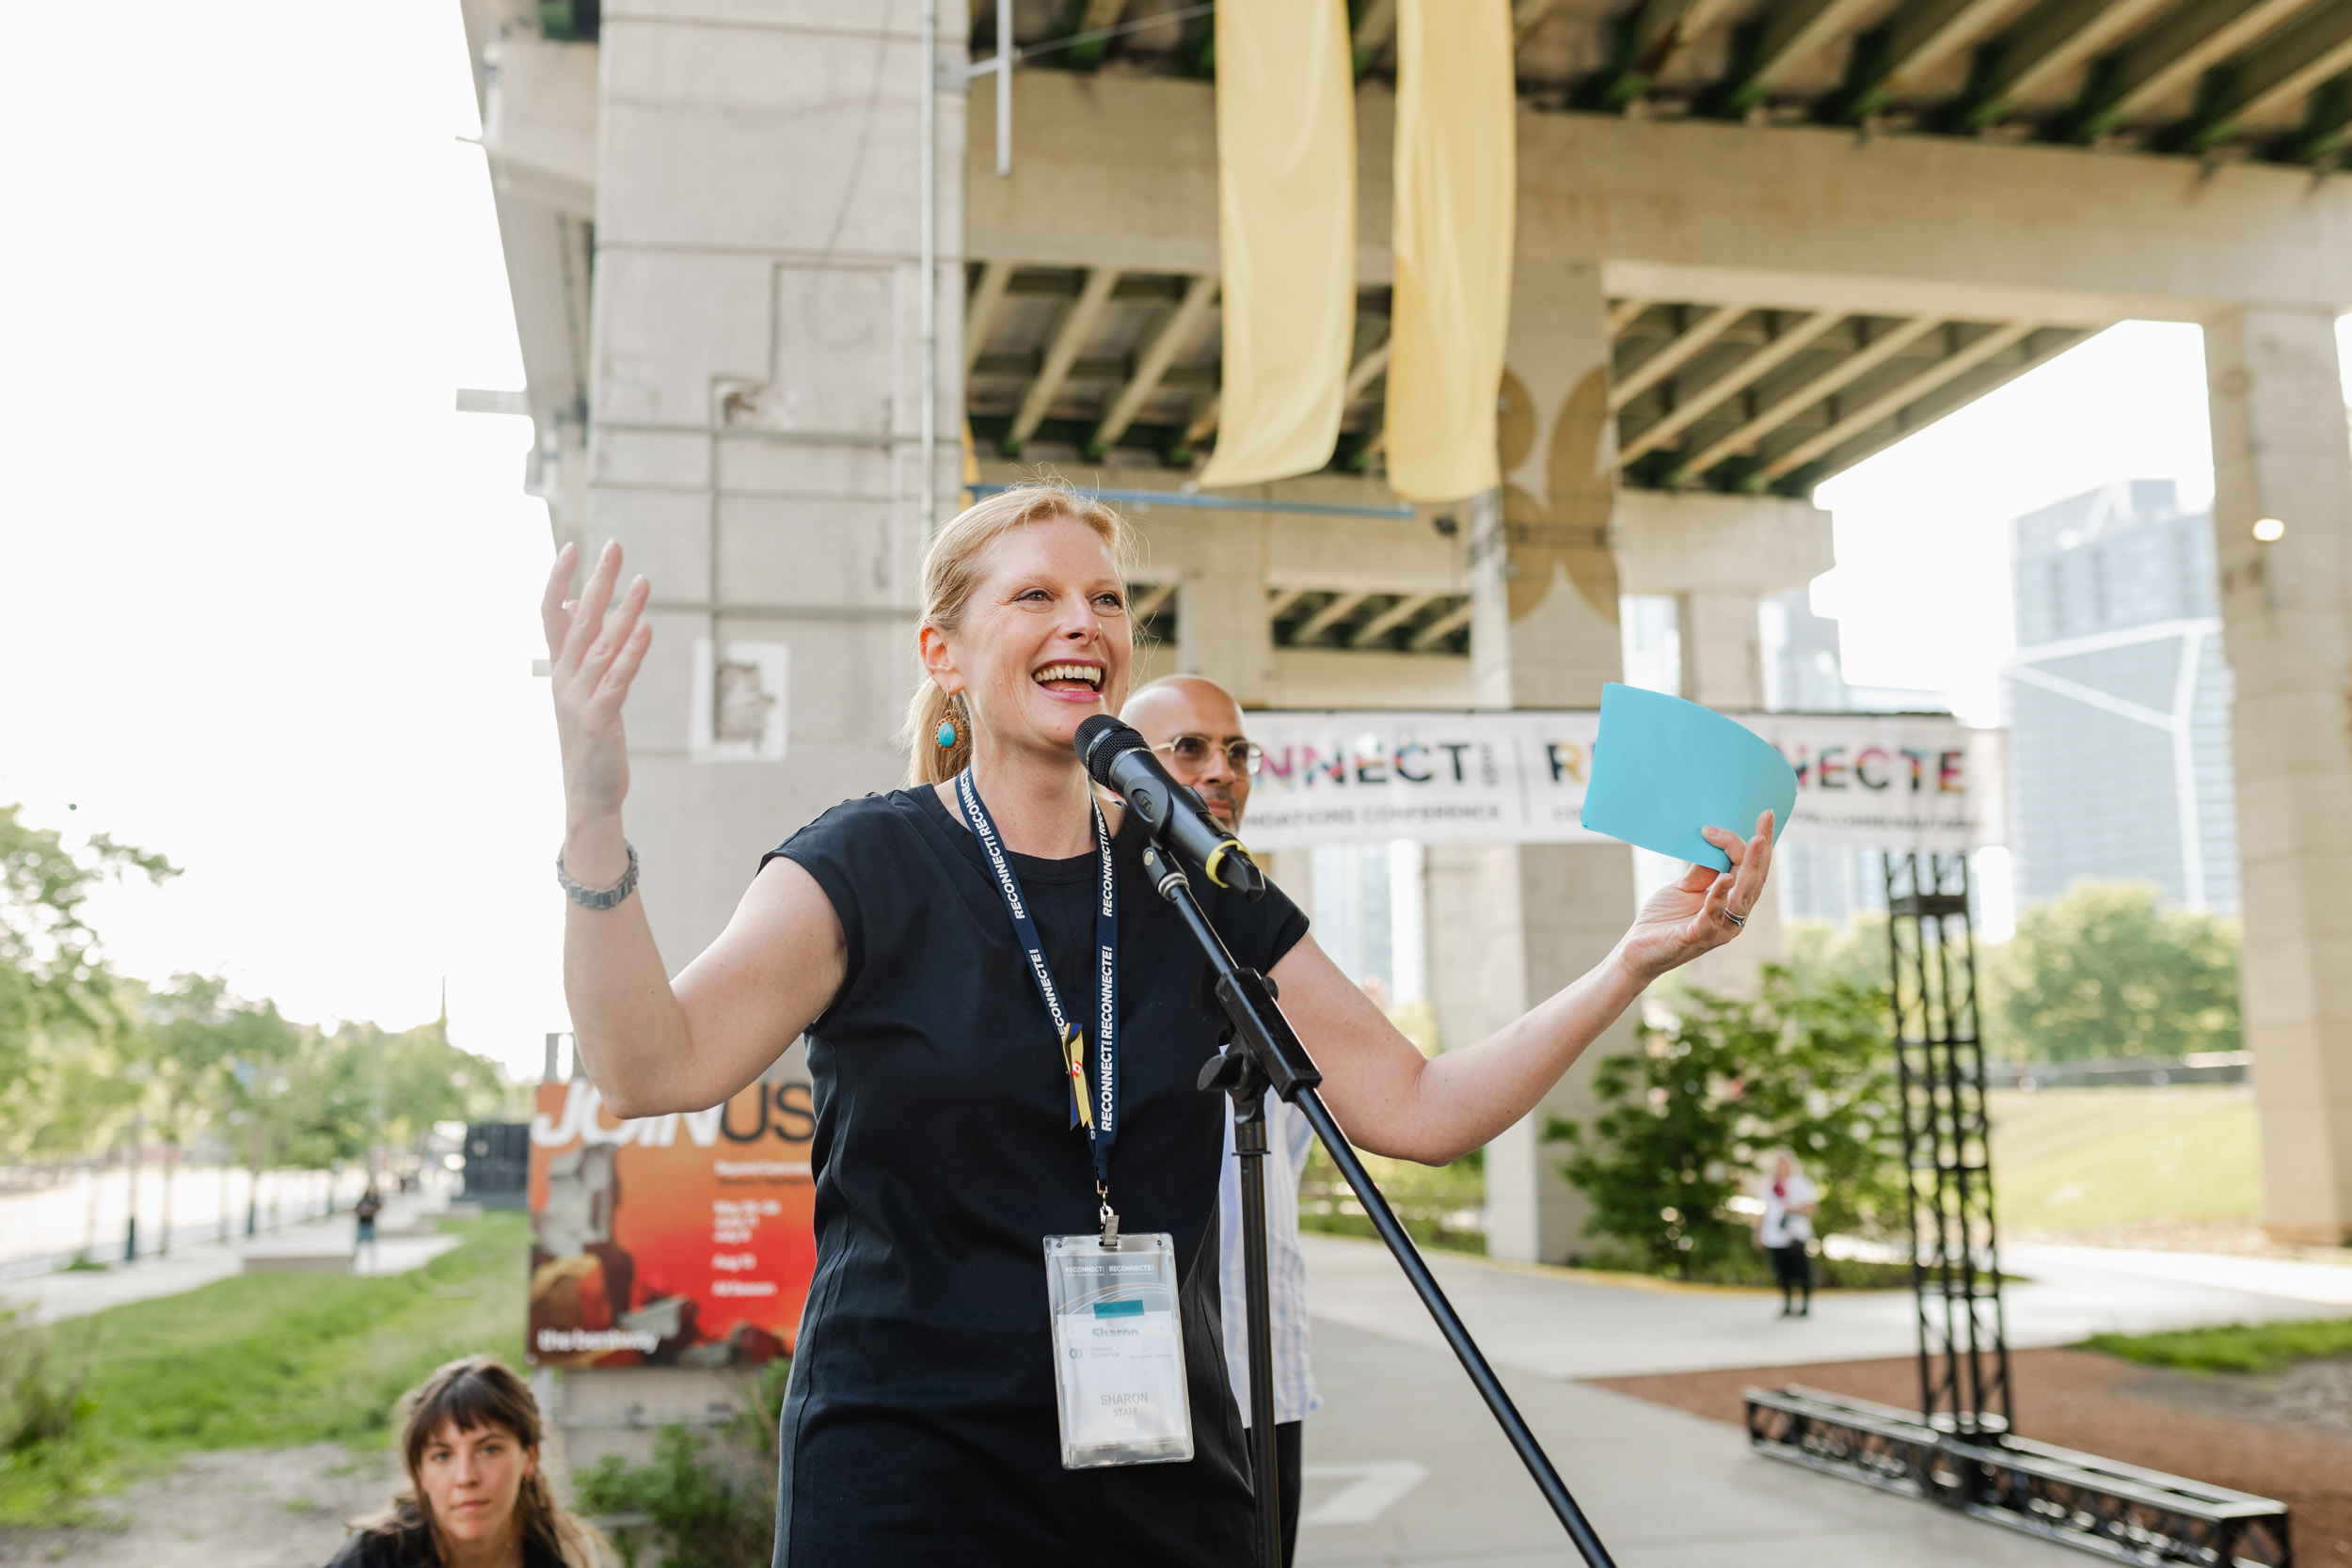 A woman is speaking at a conference in front of a bridge.